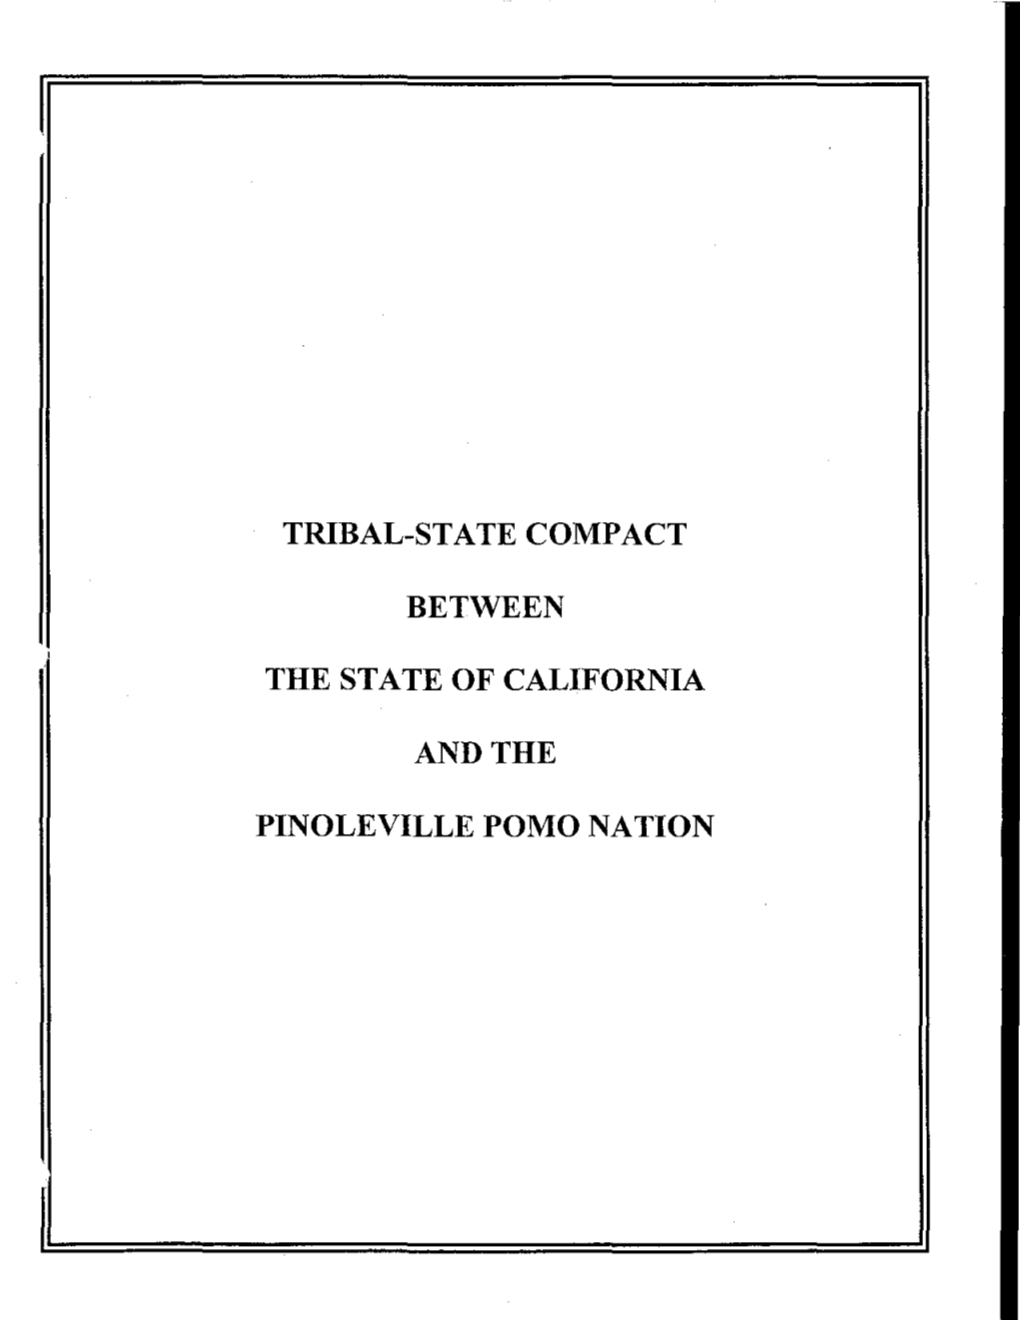 Tribal-State Compact Between the State of California and the Pinoleville Pomo Nation